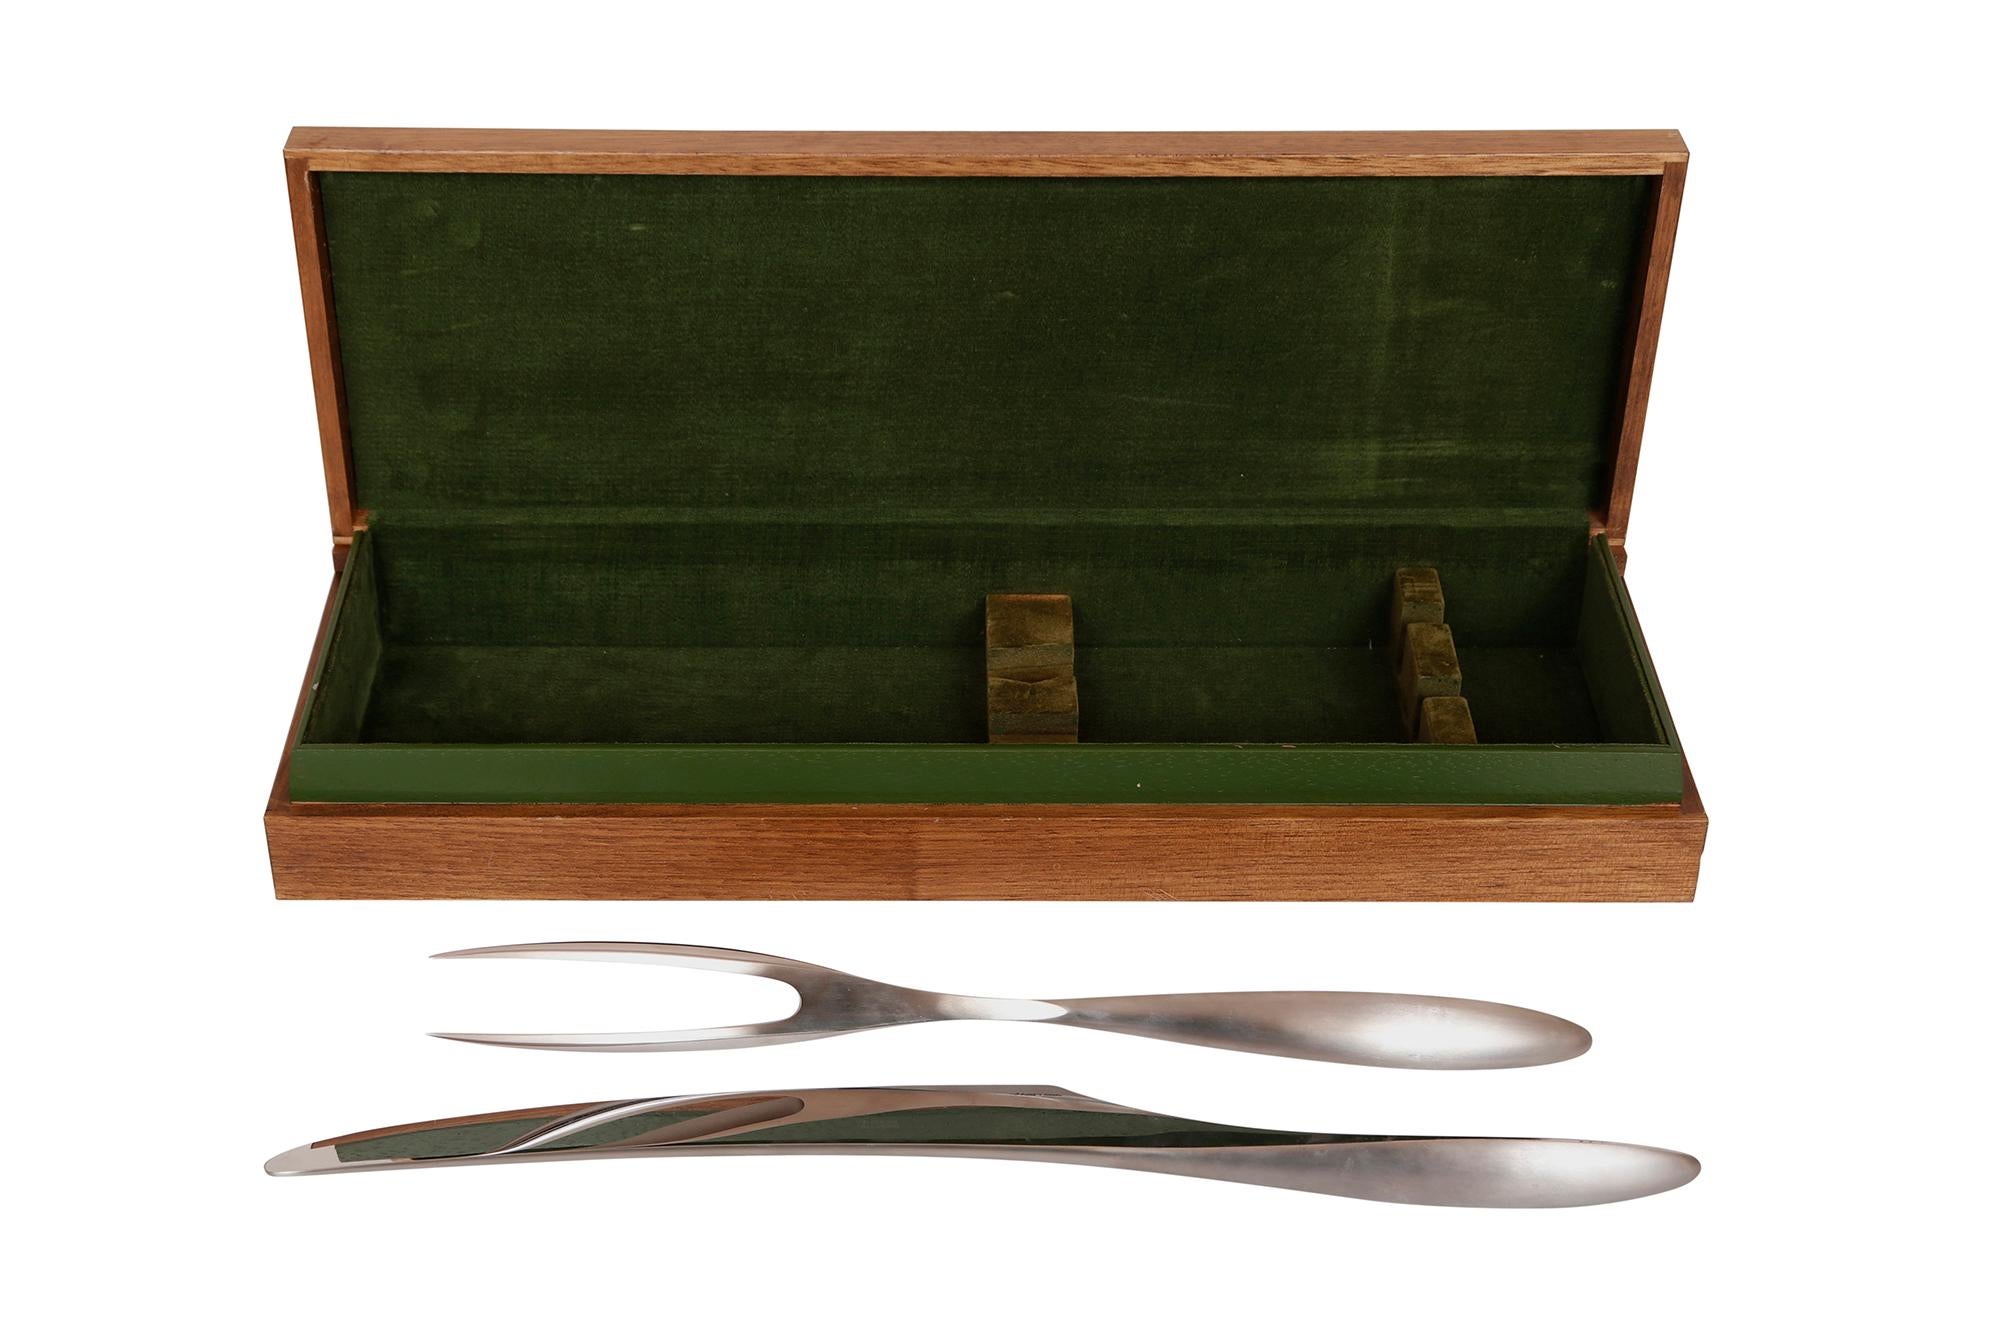 An Italian modernist stainless steel carving knife and fork set. Each is signed Chef P. Giovani and marked Stainless Steel, Italy, Pat. 85278 and Pat. 85279. Housed in a green velvet lined wooden box.